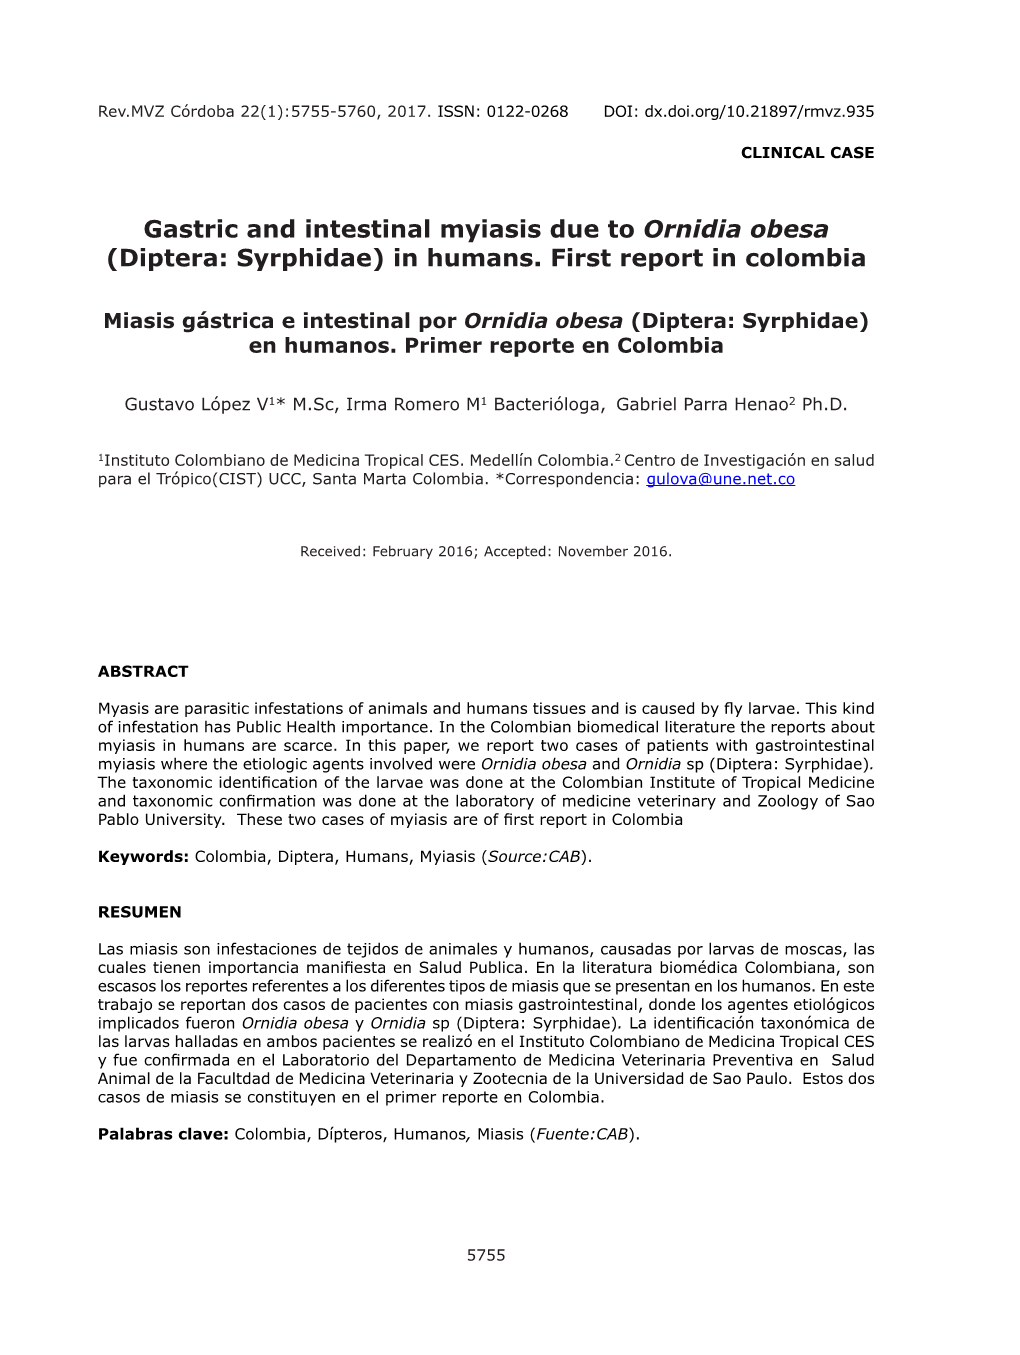 Gastric and Intestinal Myiasis Due to Ornidia Obesa (Diptera: Syrphidae) in Humans